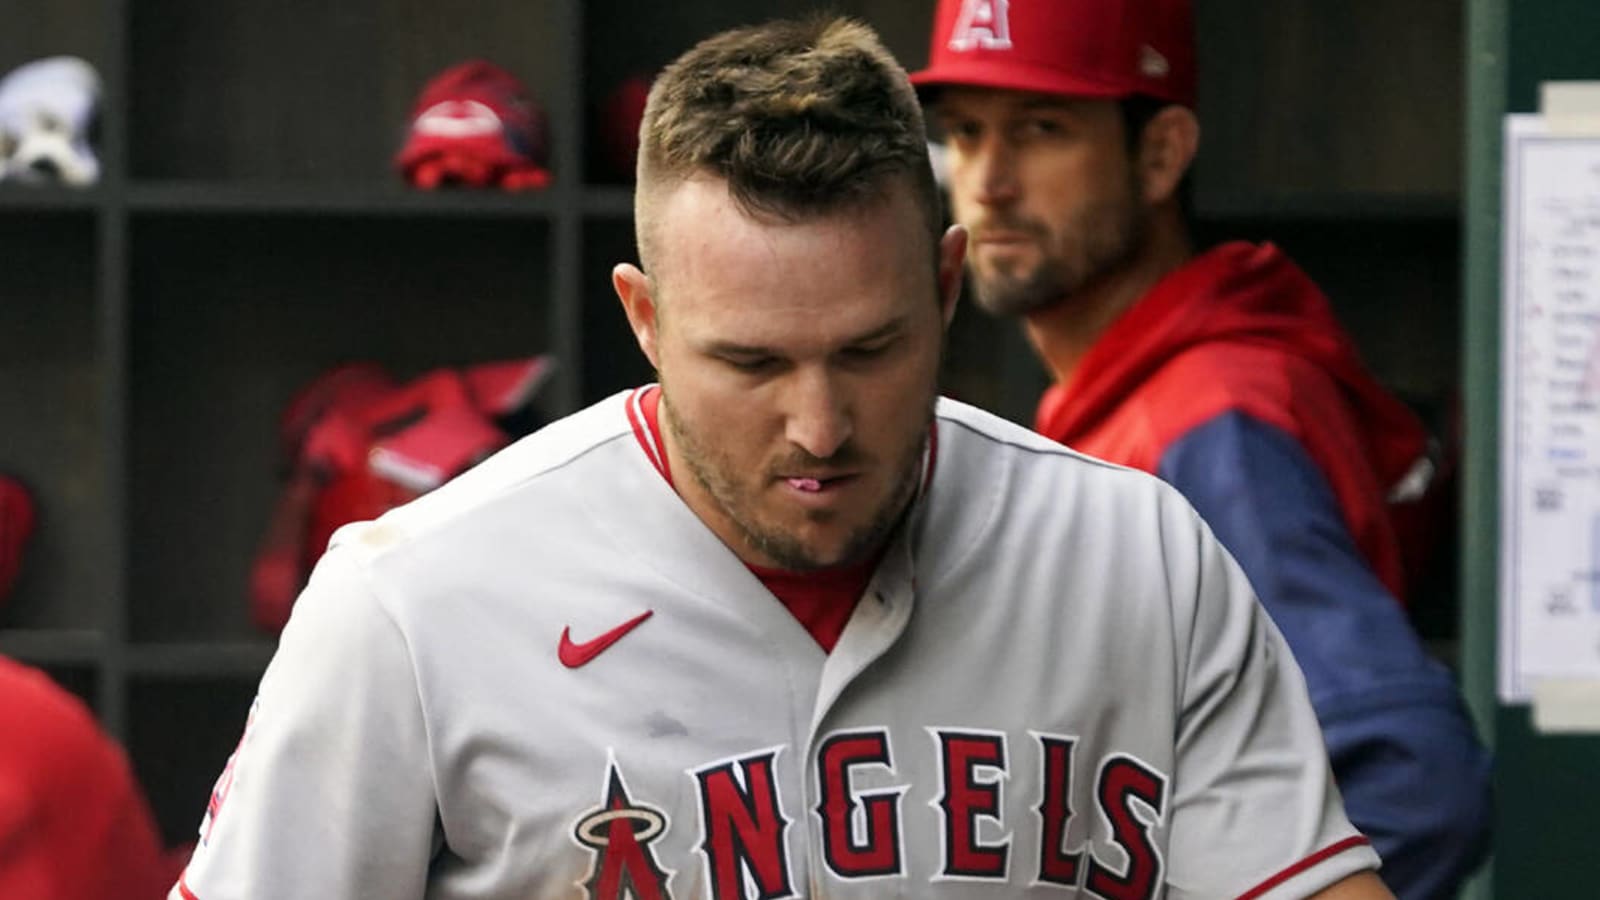 Angels star Mike Trout exits vs. Rangers after getting hit by pitch